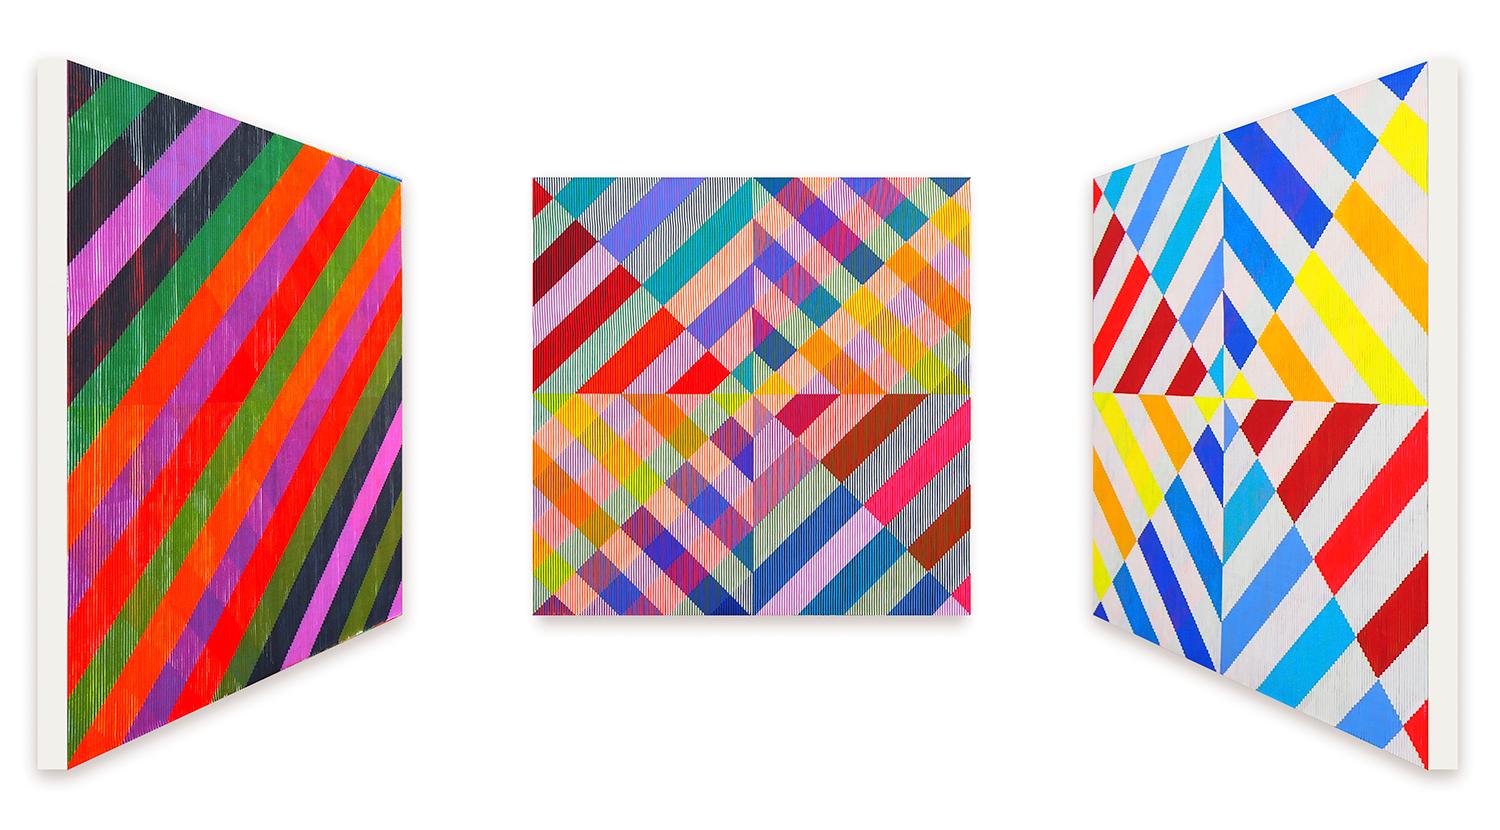 Multi-colour, op art.  Three artworks in one painting, where the artworks changes when you walk from left to right. One side are linear forms; the other is multi-colour geometrics. 
Antonio Marra’s 3D paintings are simultaneously familiar and